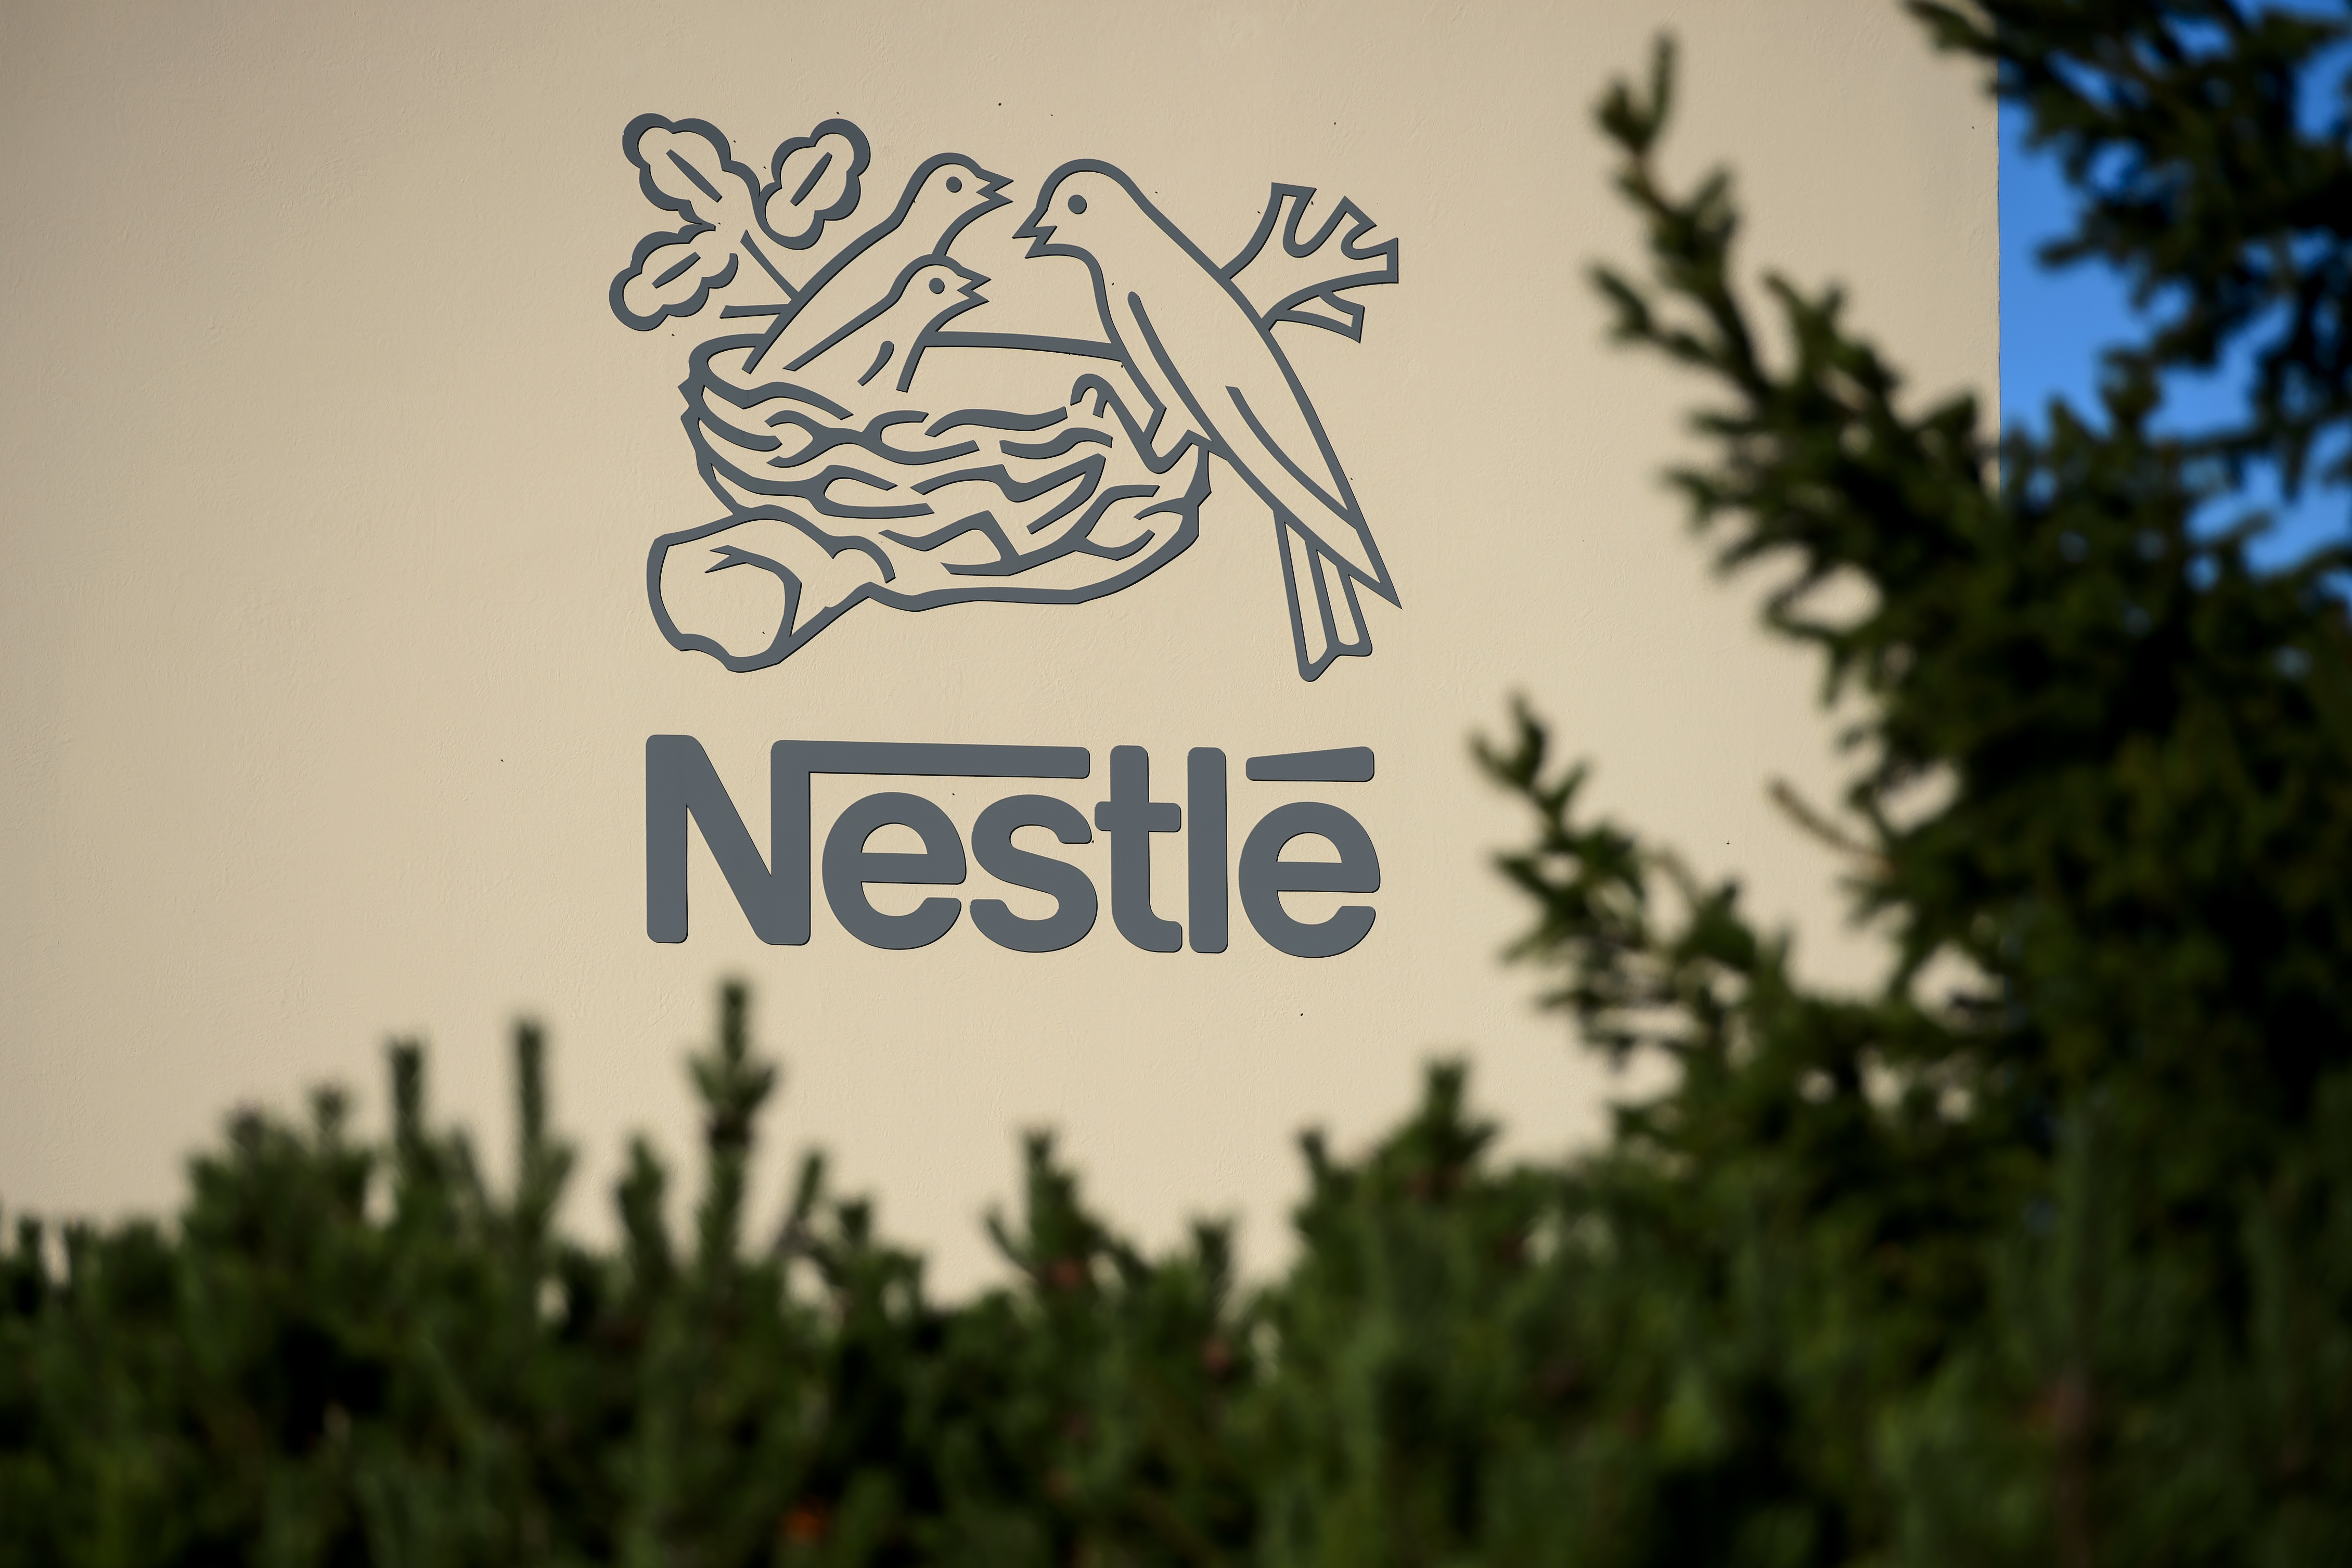 (FILES) This file photo taken on October 9, 2014 shows the logo of the world's leading food industry group Nestle is seen at the group's Research Center in Vers-chez-les-Blanc, Switzerland. Nestle announced on June 20, 2016 it will reintroduce Cuban coffee to the US for the first time in more than 50 years following the easing of United States sanctions on Cuba. The Swiss food giant plans to sell Cuban coffee under its individual-capsule Nespresso brand, initially as a limited edition, starting in several months.   / AFP PHOTO / FABRICE COFFRINI